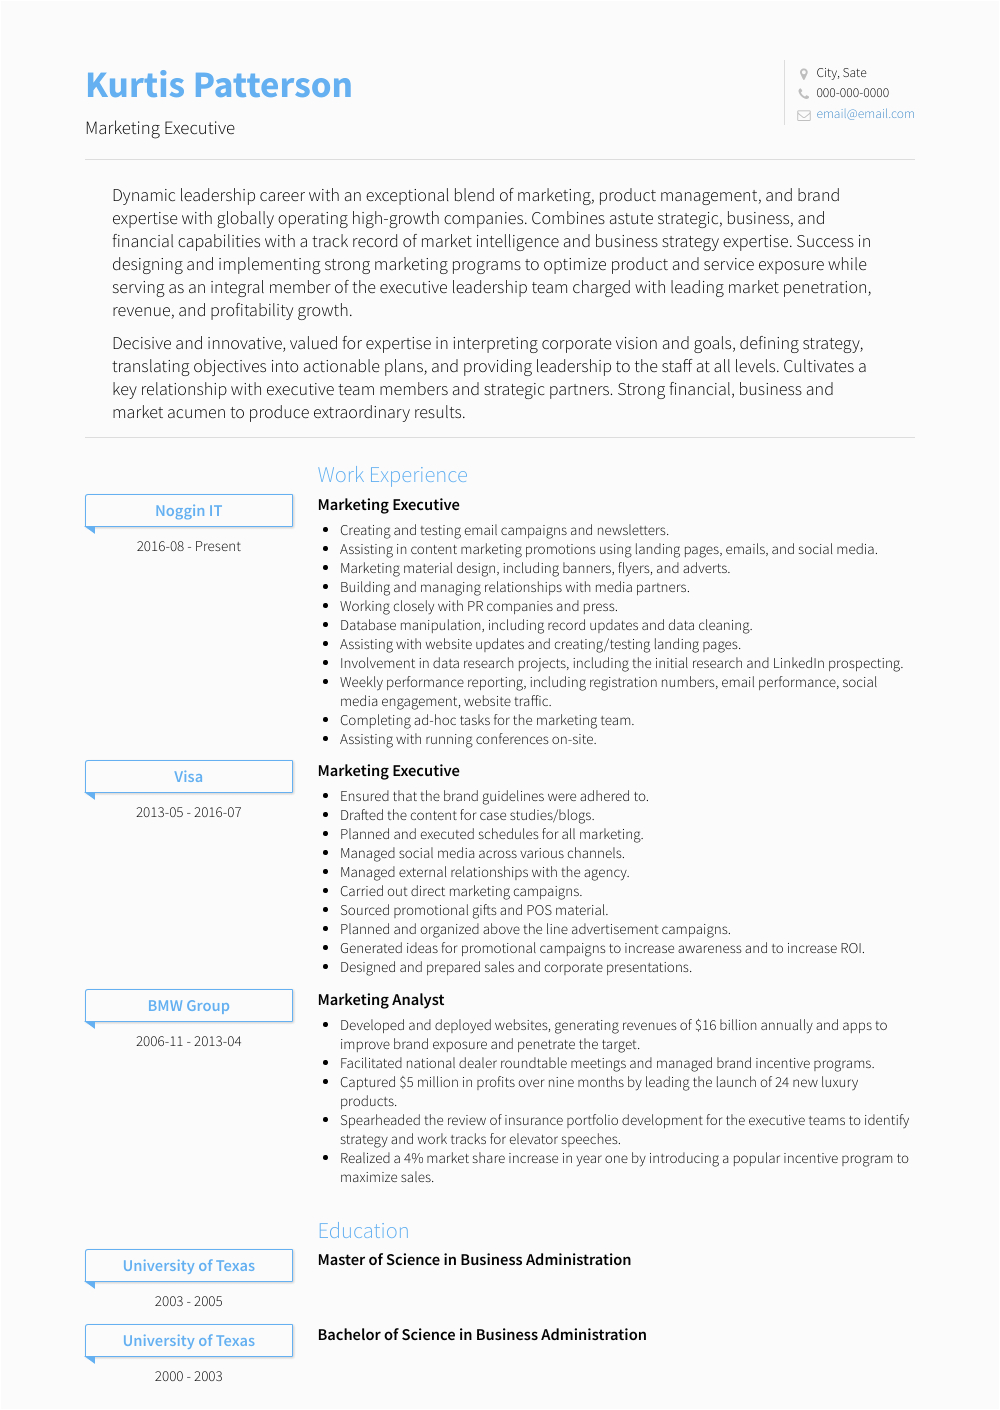 Sample Resume for Marketing Executive Position Marketing Executive Resume Samples and Templates